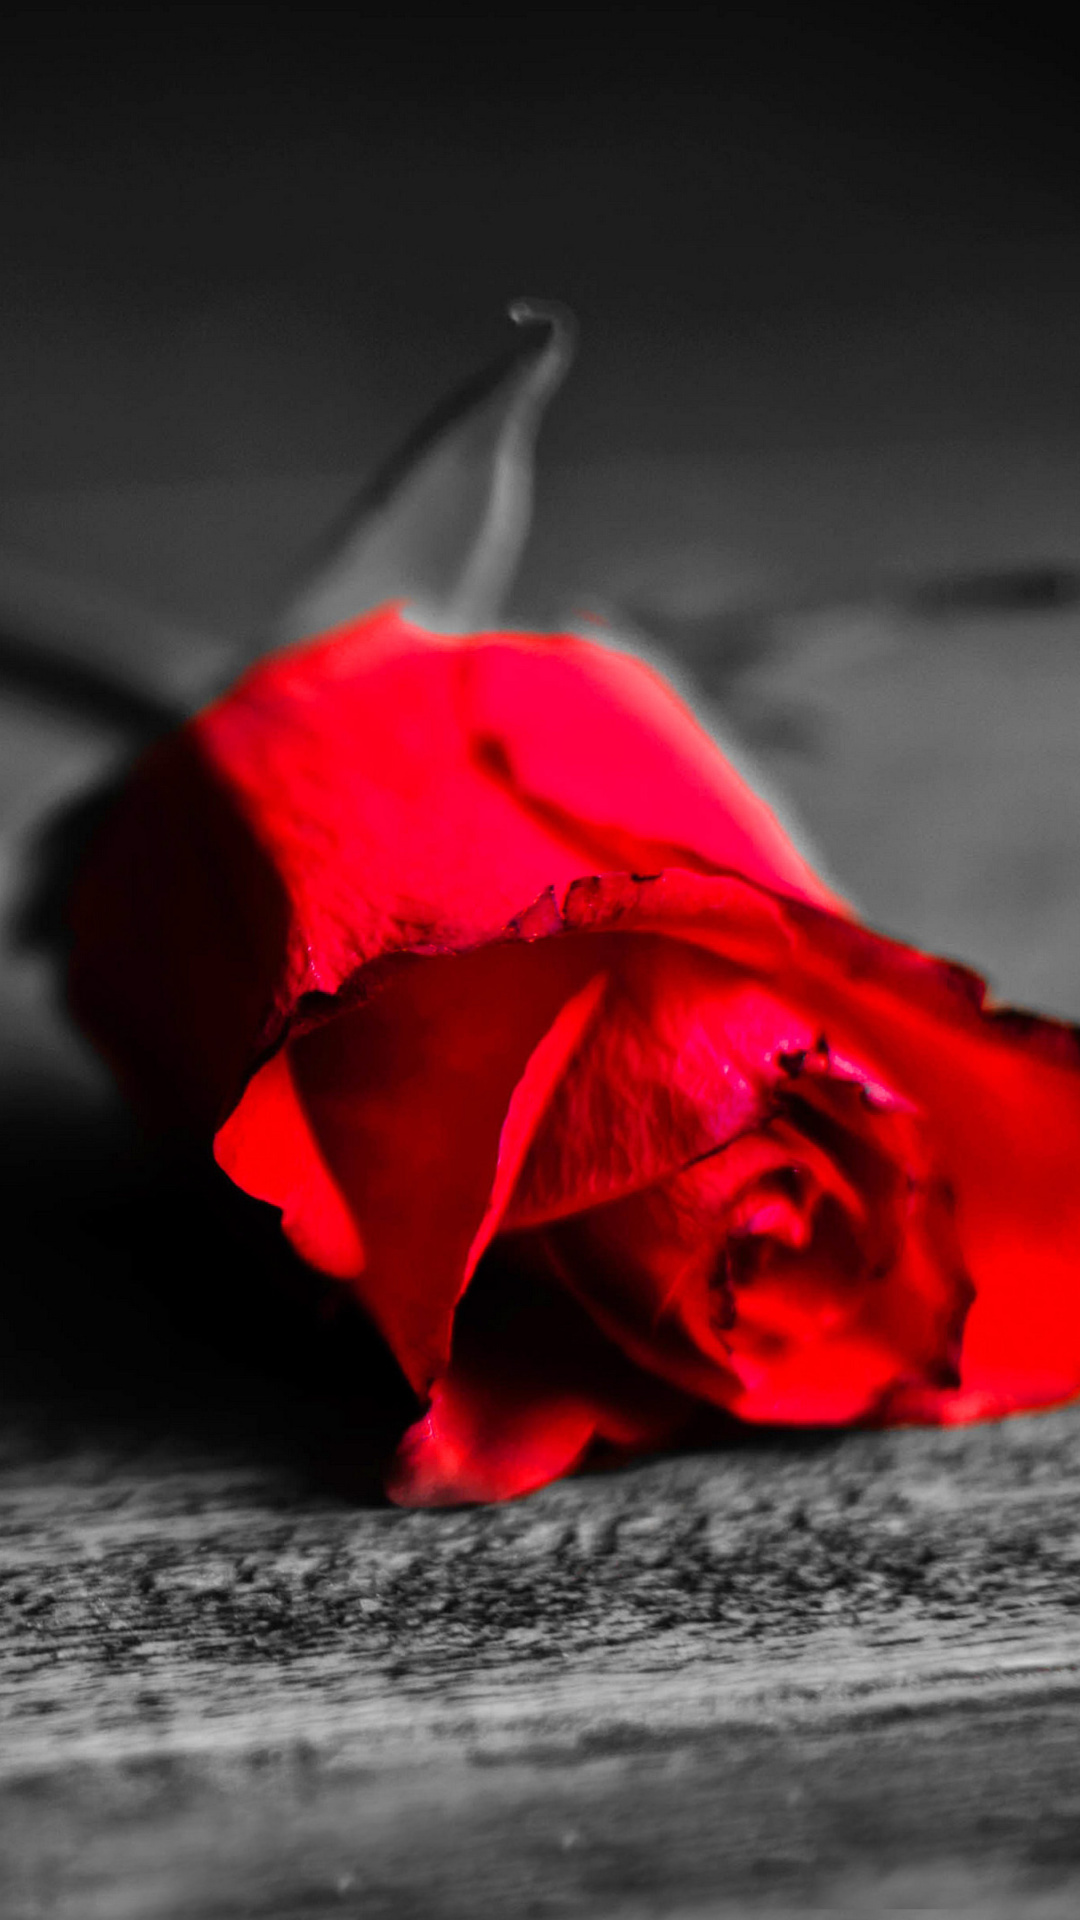 Red Rose On Wooden Surface screenshot #1 1080x1920